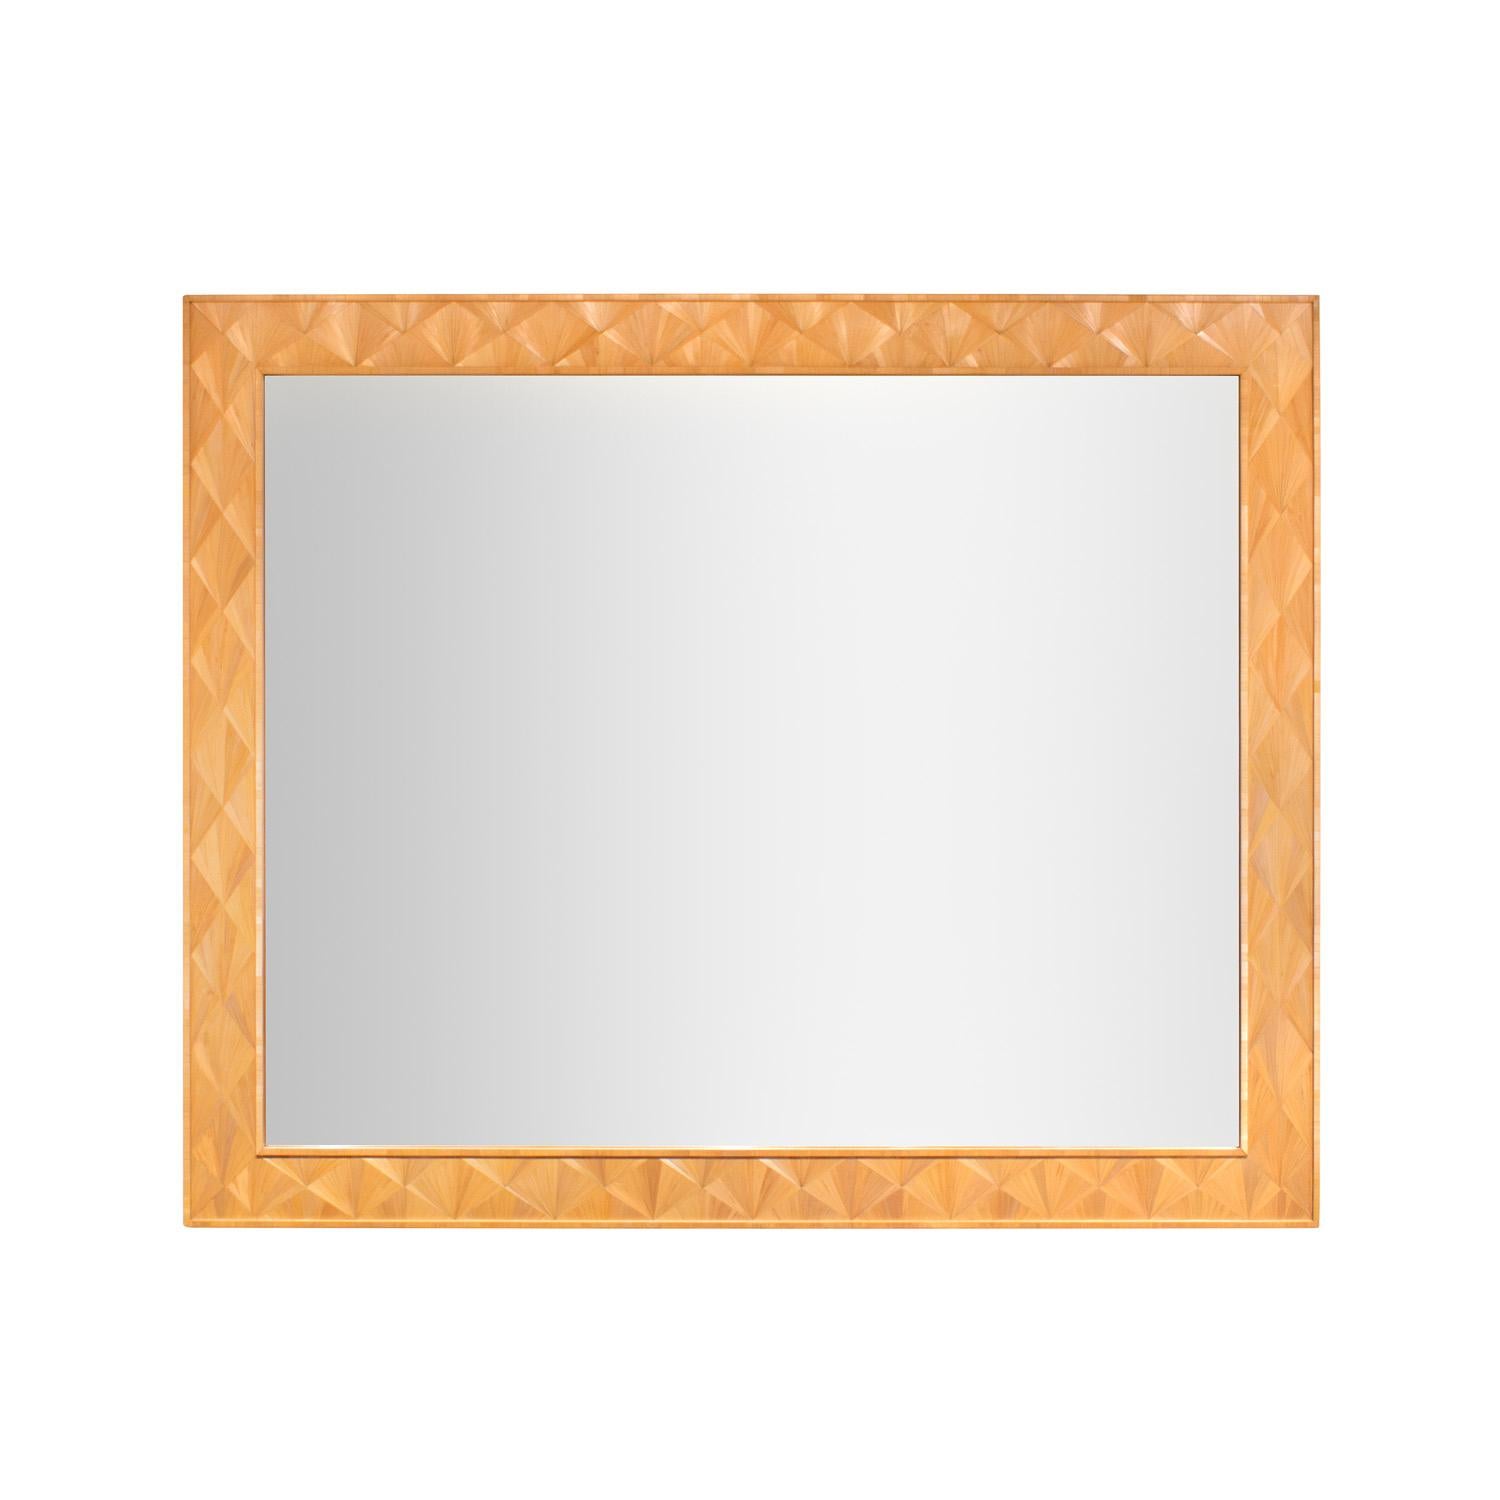 Exceptionally crafted large mirror, frame with exquisite diamond pattern with intricate inlays, by artisans at Ludwig & Dominique, France 2003 (Signed 